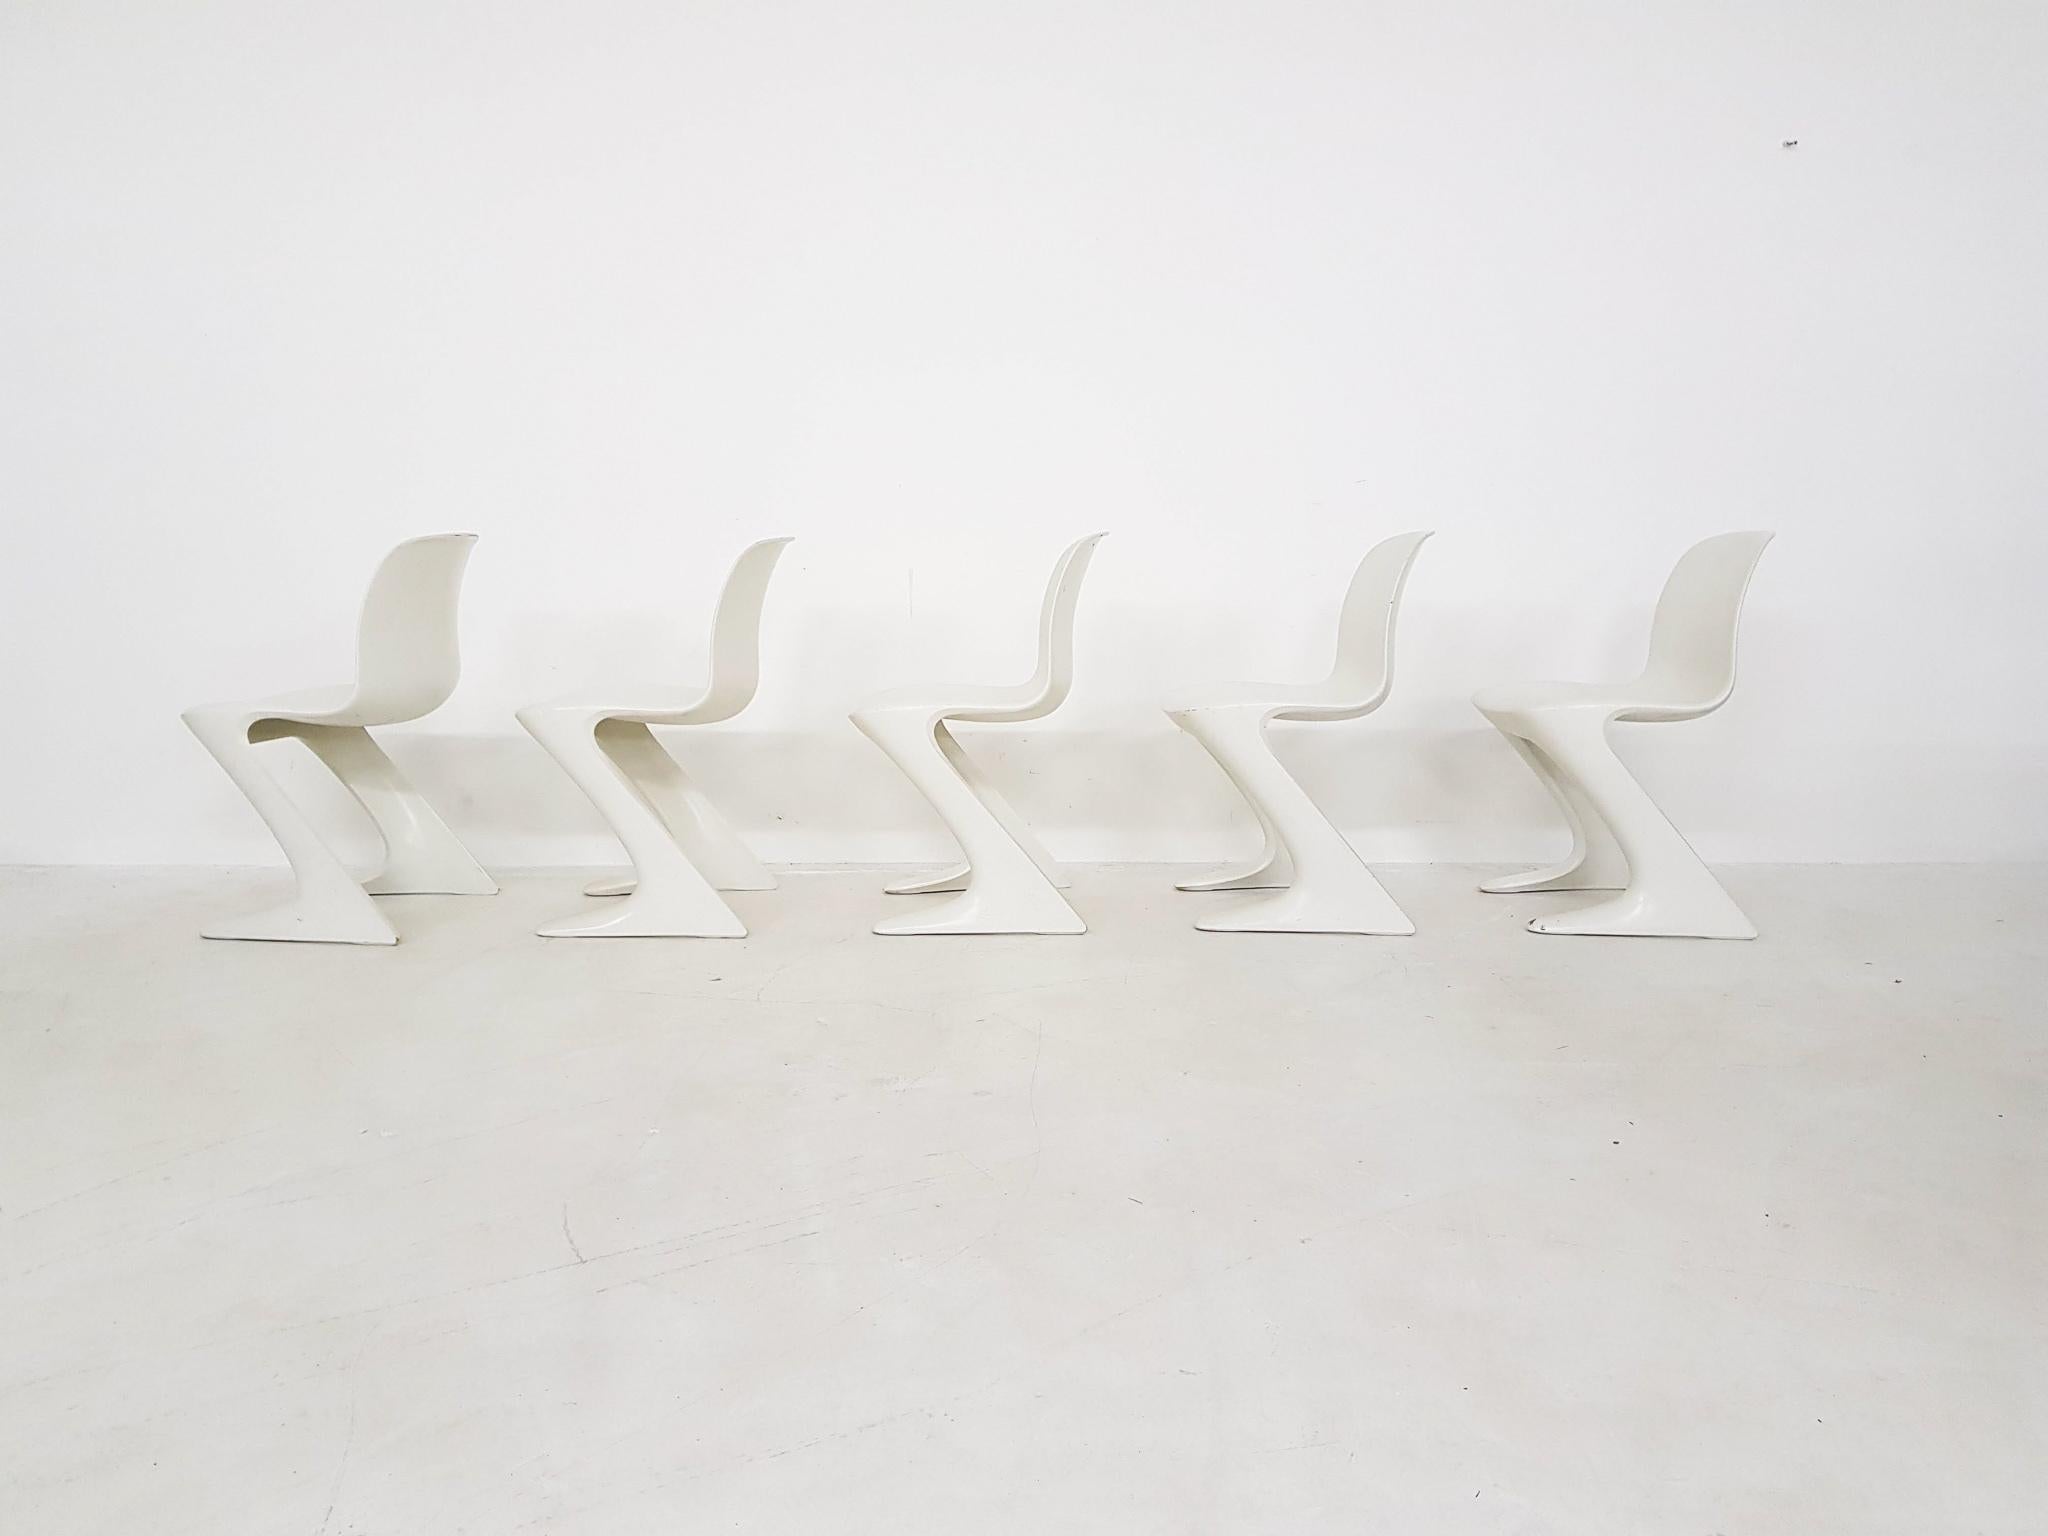 Five white fiberglass dining chairs designed by Ernst Moeckl for Horn Collection Baydur, Germany, 1968. Baydur also produced the early Panton chair by Verner Panton (S-chair)
This design called Z- chairs, Kangaroo chairs or Ztuhl. These chairs are